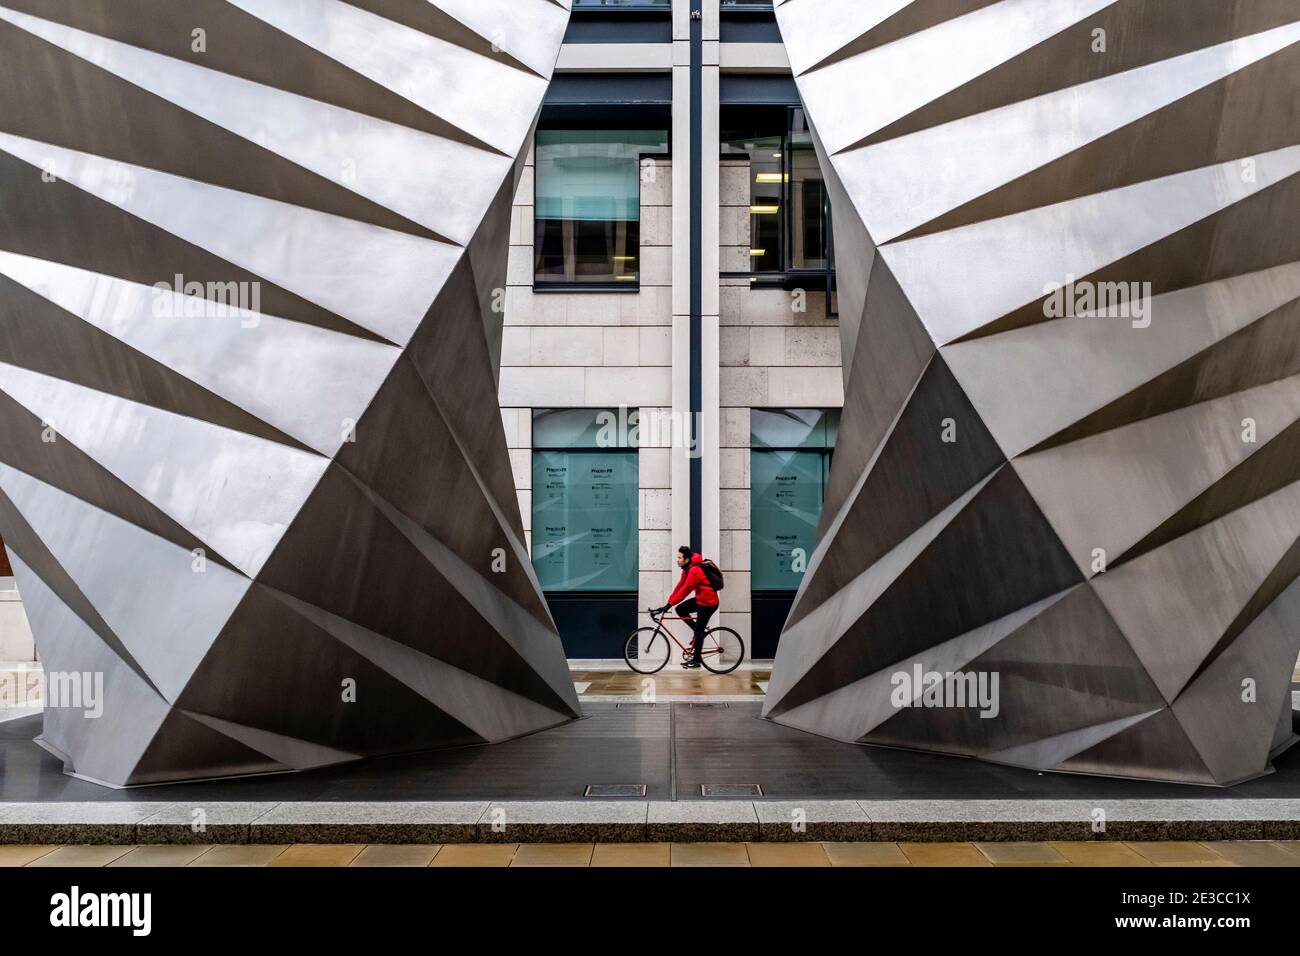 A Young Man Cycles Paternoster Vents, Londra, Regno Unito. Foto Stock